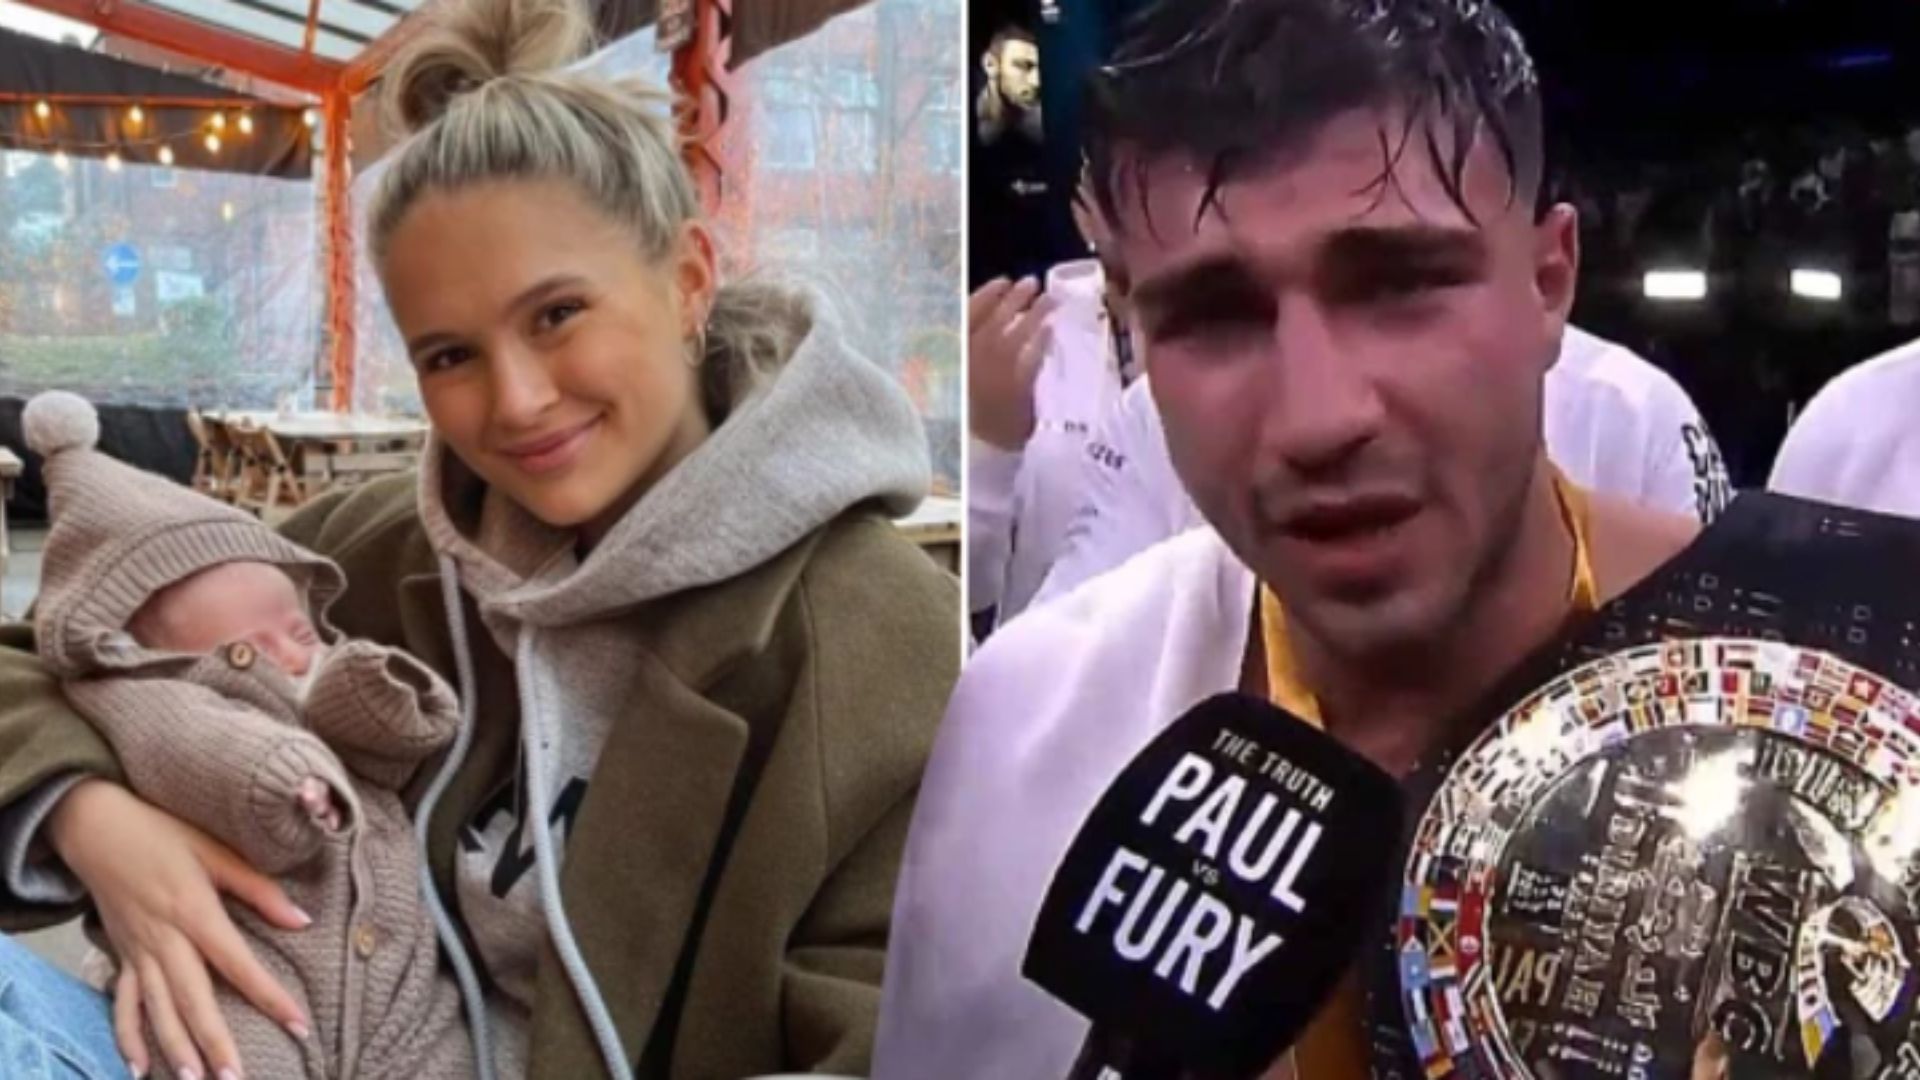 Tommy Fury sorrowfully commits triumph over Jake Paul to little girl